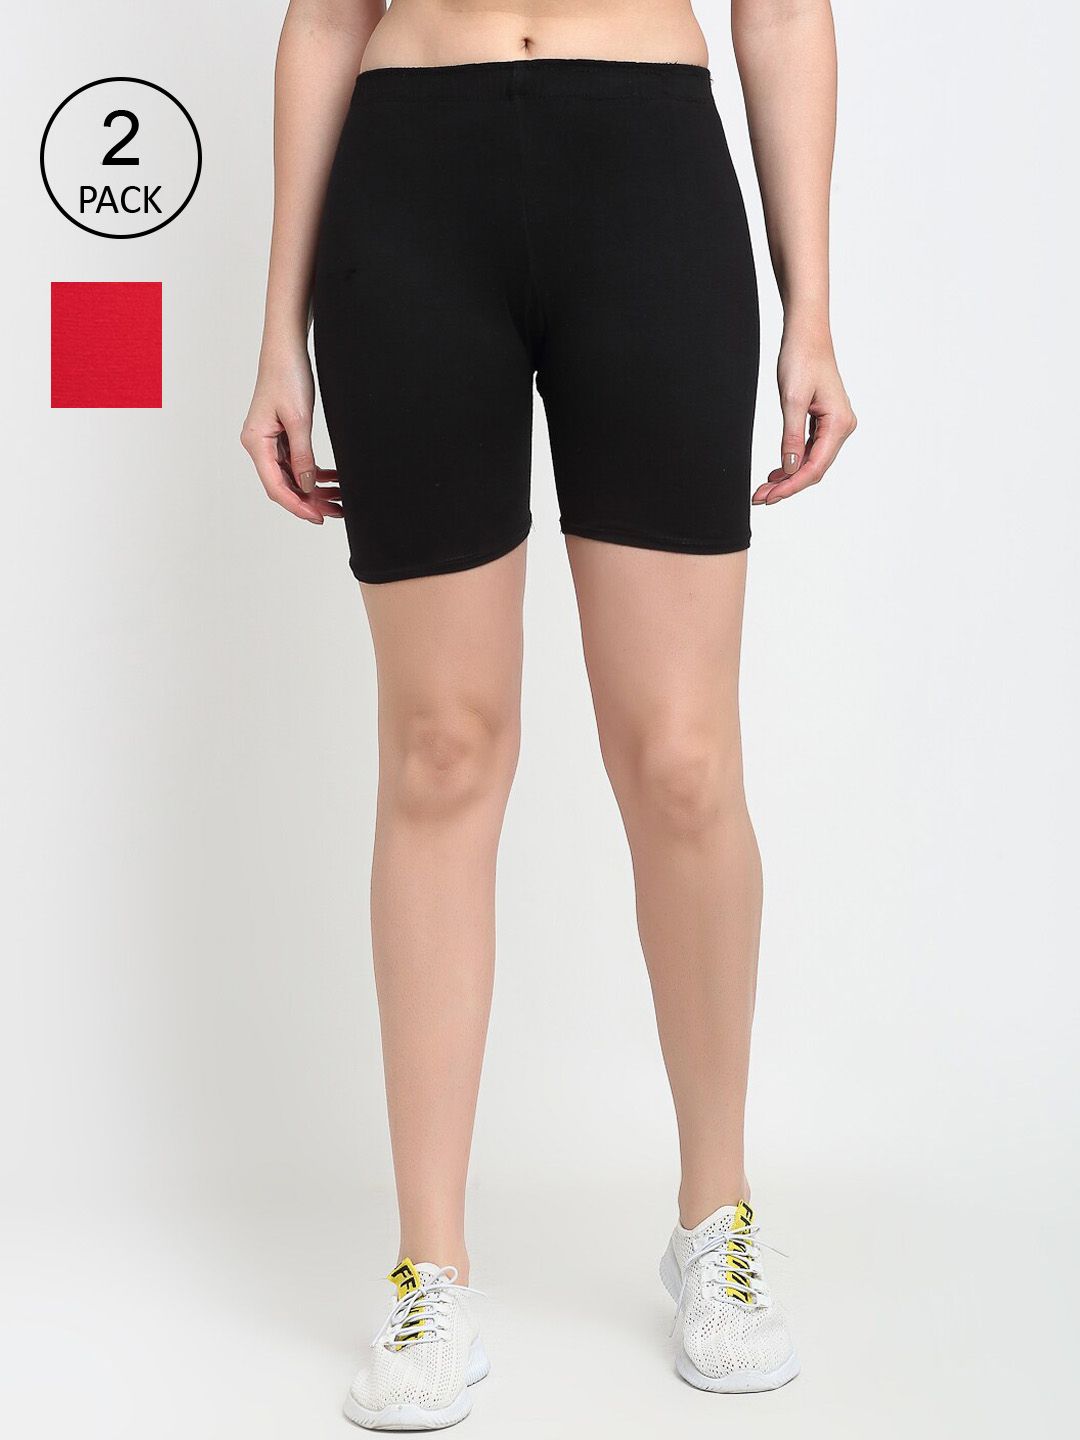 GRACIT Women Set Of 2 Black & Red Cycling Sports Shorts Price in India